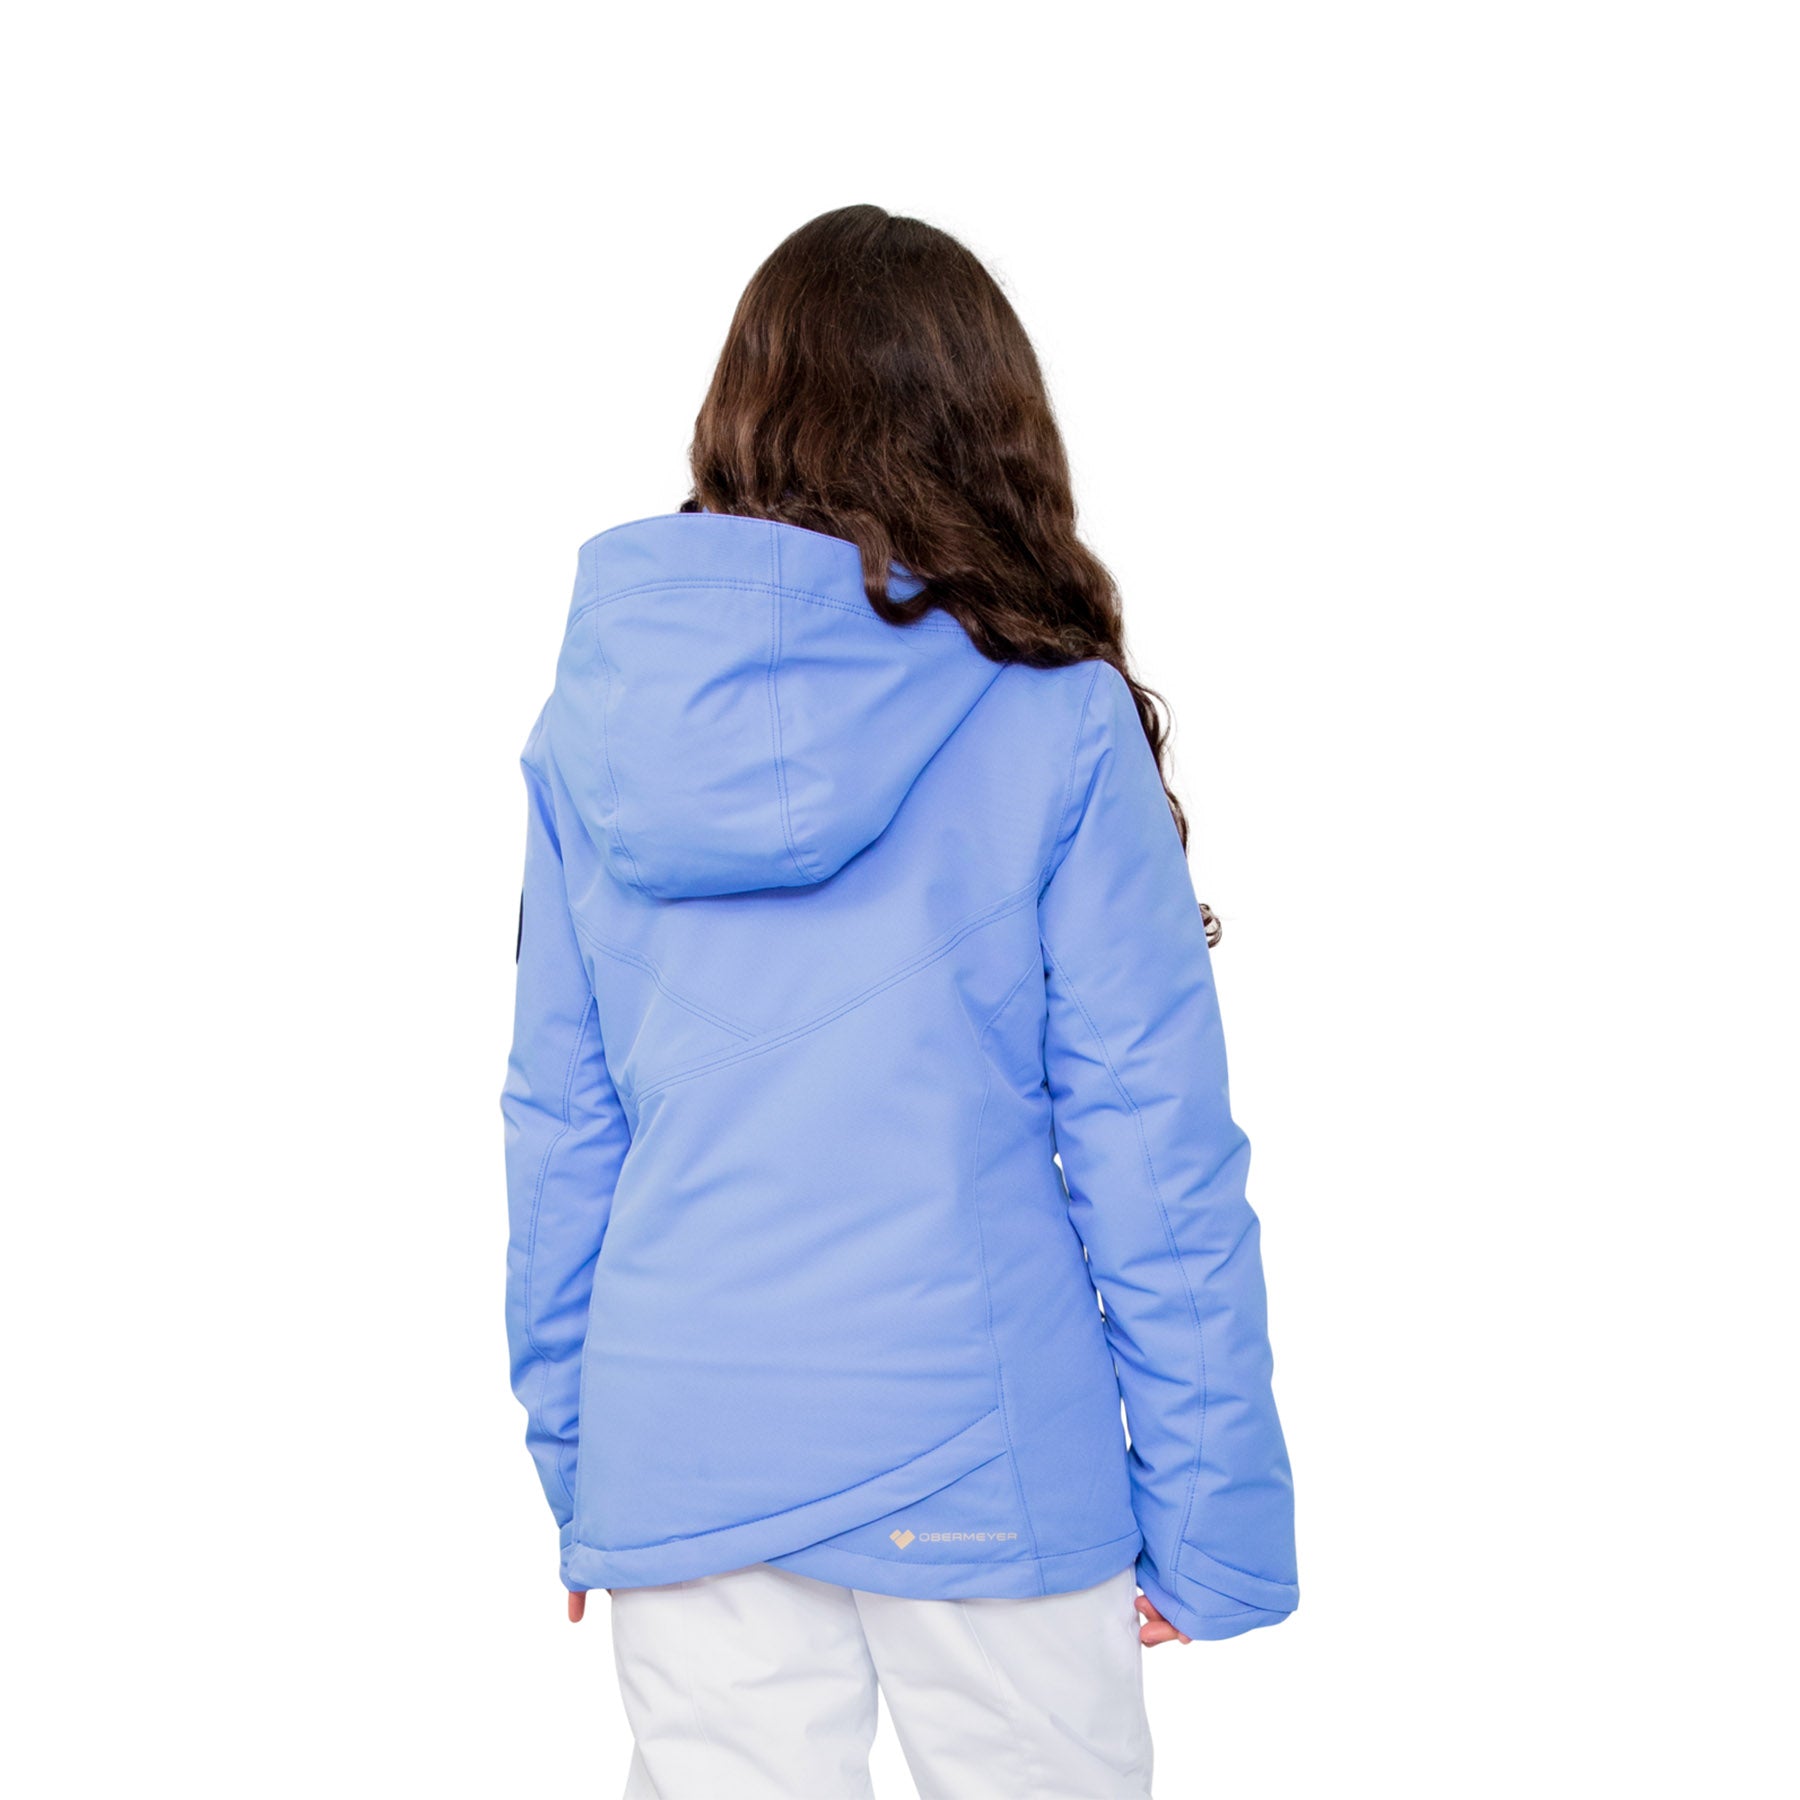 Image features the back of a female model wearing the Obermeyer girls Rylee Jacket in Vinca light purple and white ski pants.